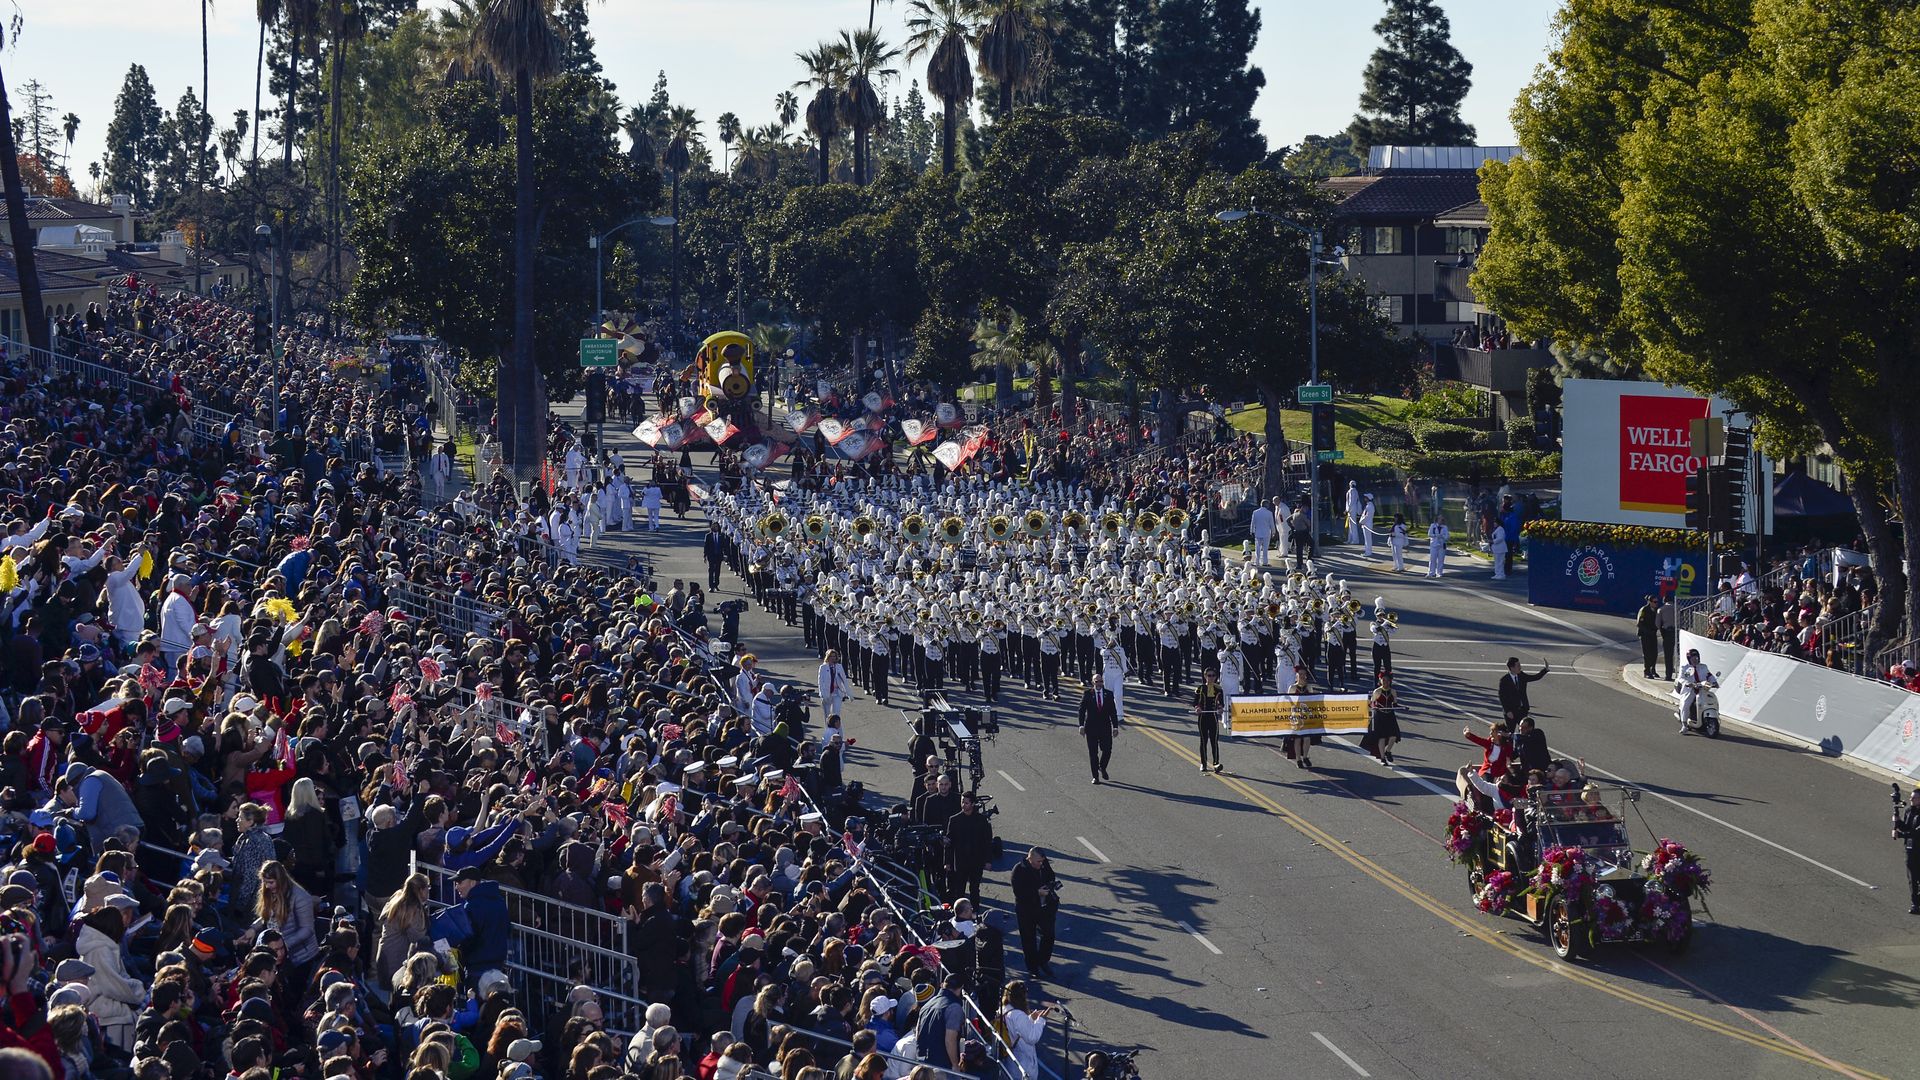 People in the stands watching a marching band perform at the Rose Bowl Parade in Pasadena